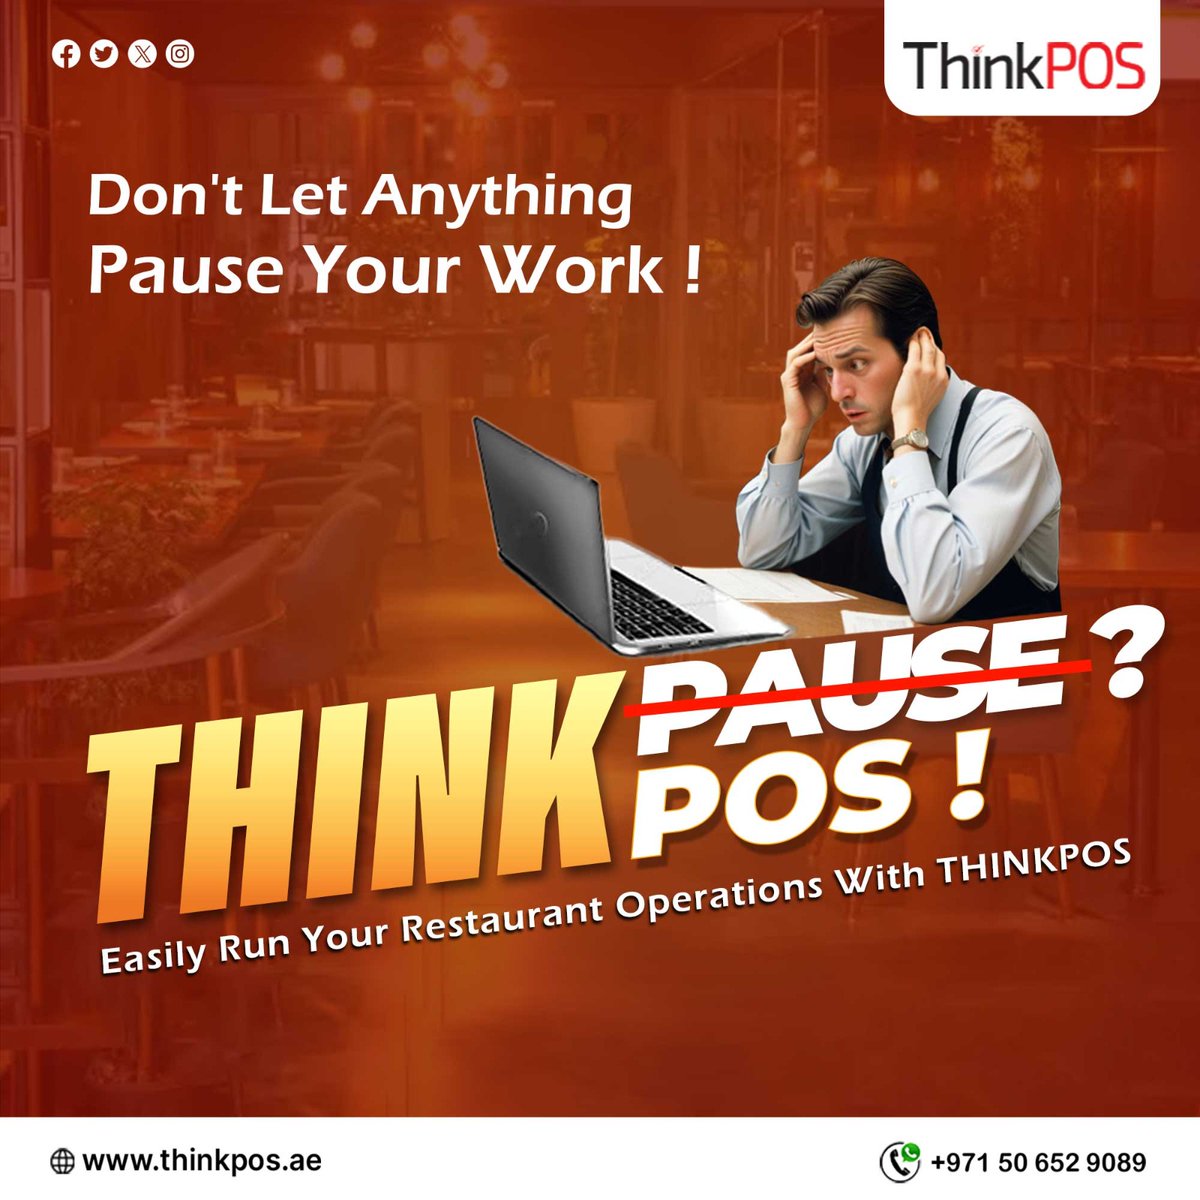 Don't Let Anything Pause Your Work

Easily Run Your Restaurant Operations With ThinkPOS

Call us - +971 50 652 9089
Mail us - sales@thinkpos.ae
Visit us - thinkpos.ae

#RestaurantTech #POS #restaurantsdubai #restaurantmanagement #possoftwaredubai #Thinkpos